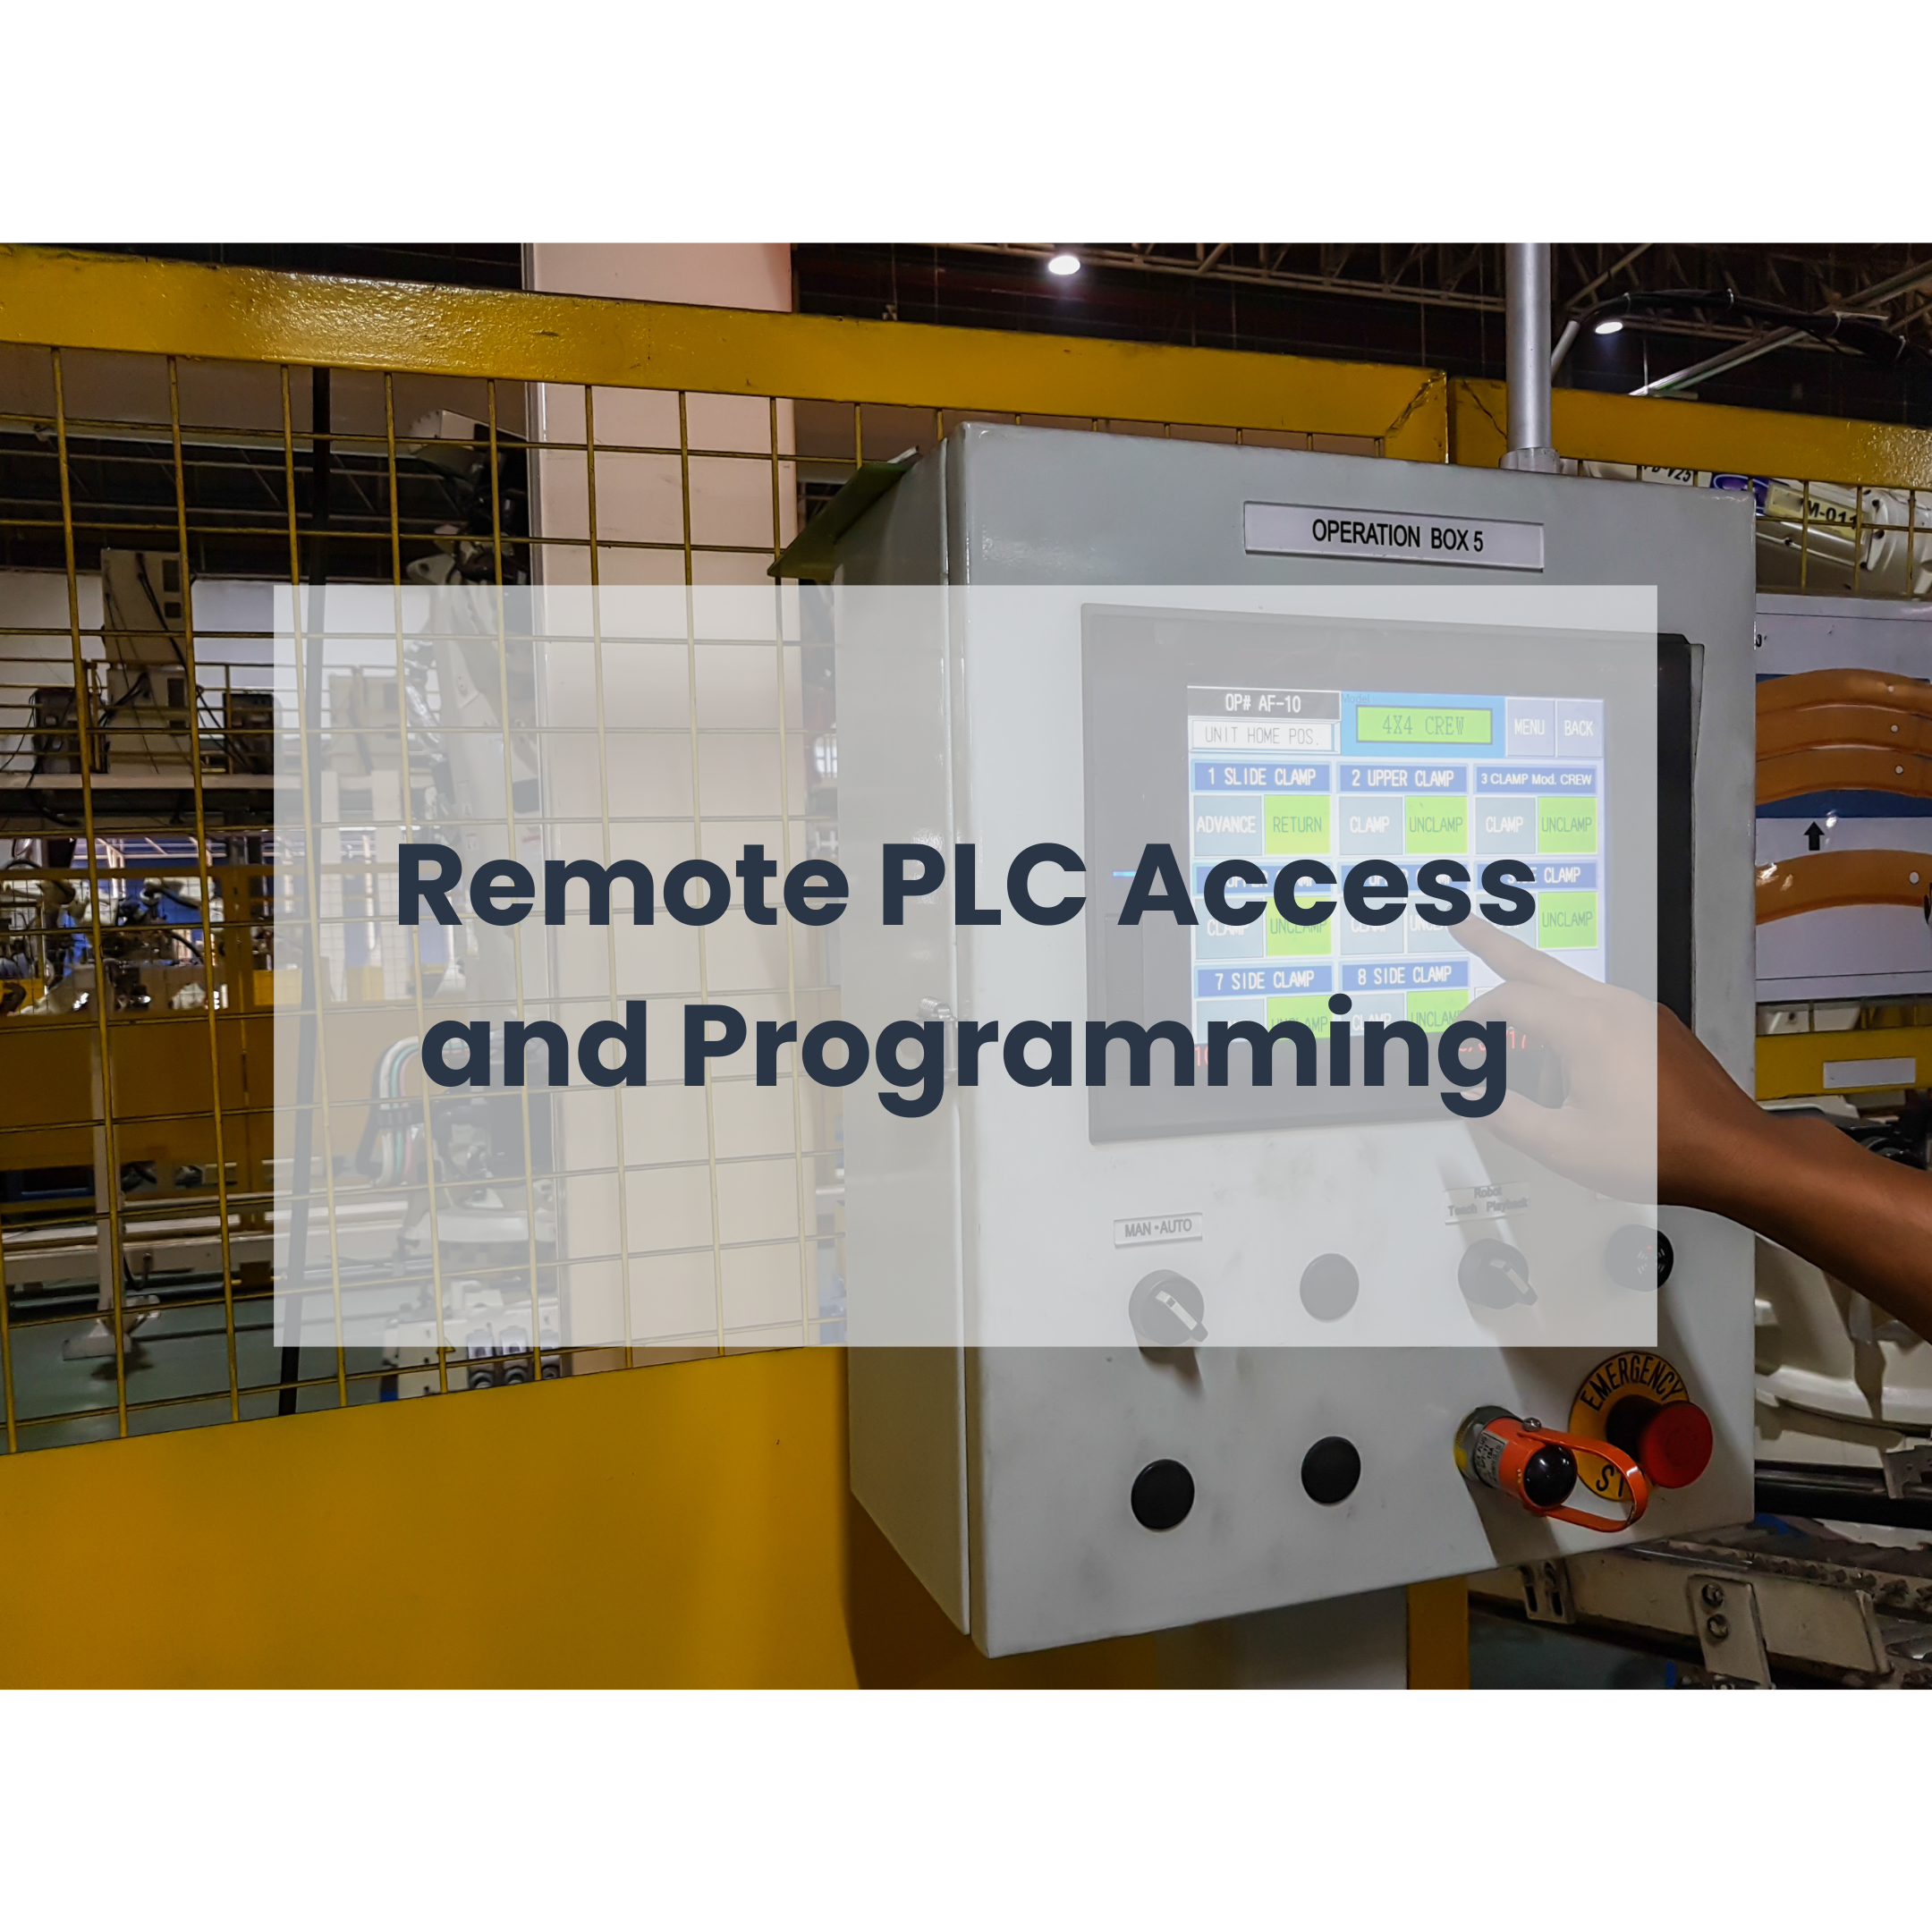 Remote PLC Access and Programming